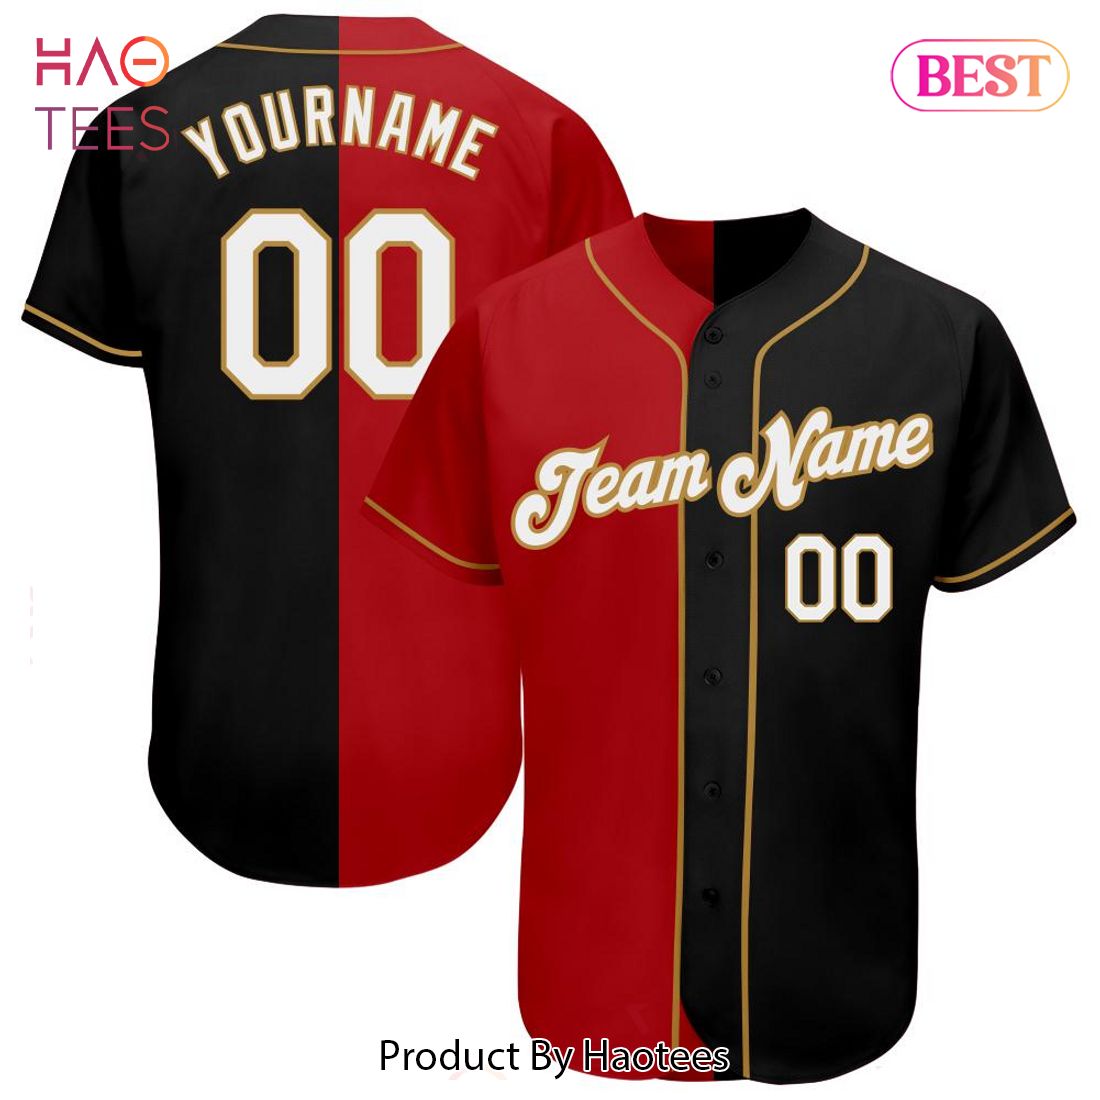 red and gold baseball jersey